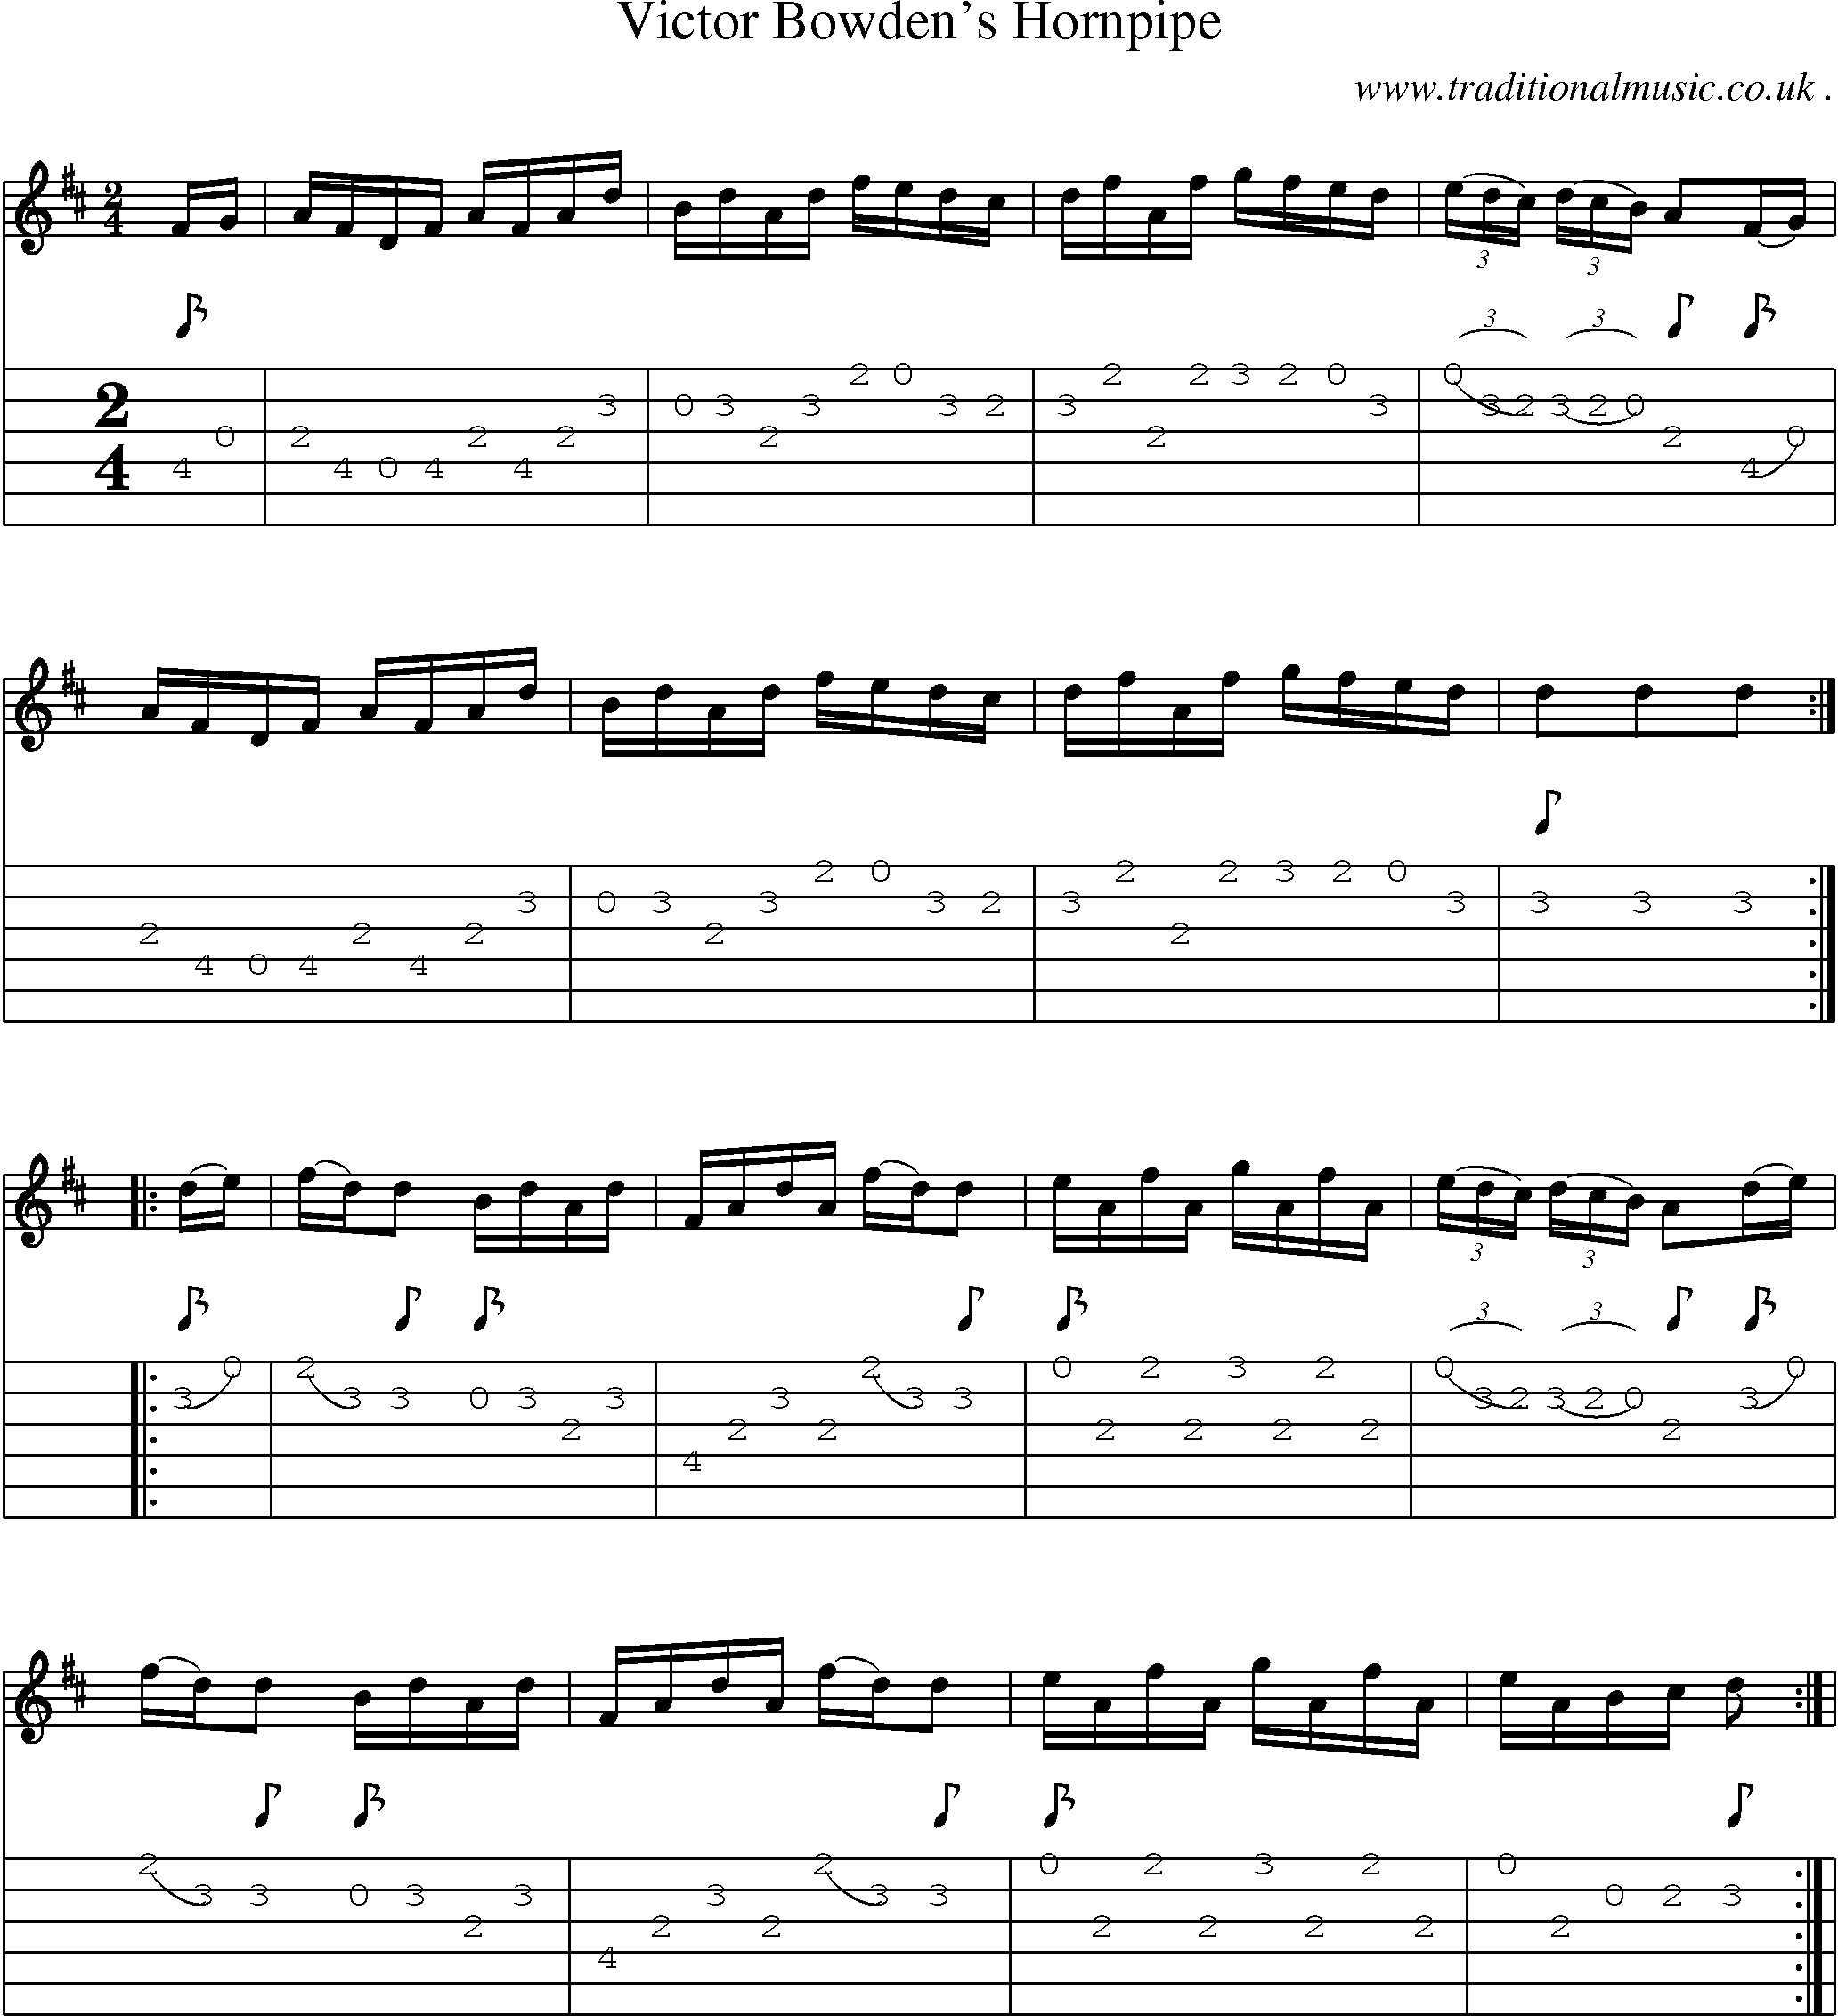 Sheet-Music and Guitar Tabs for Victor Bowdens Hornpipe